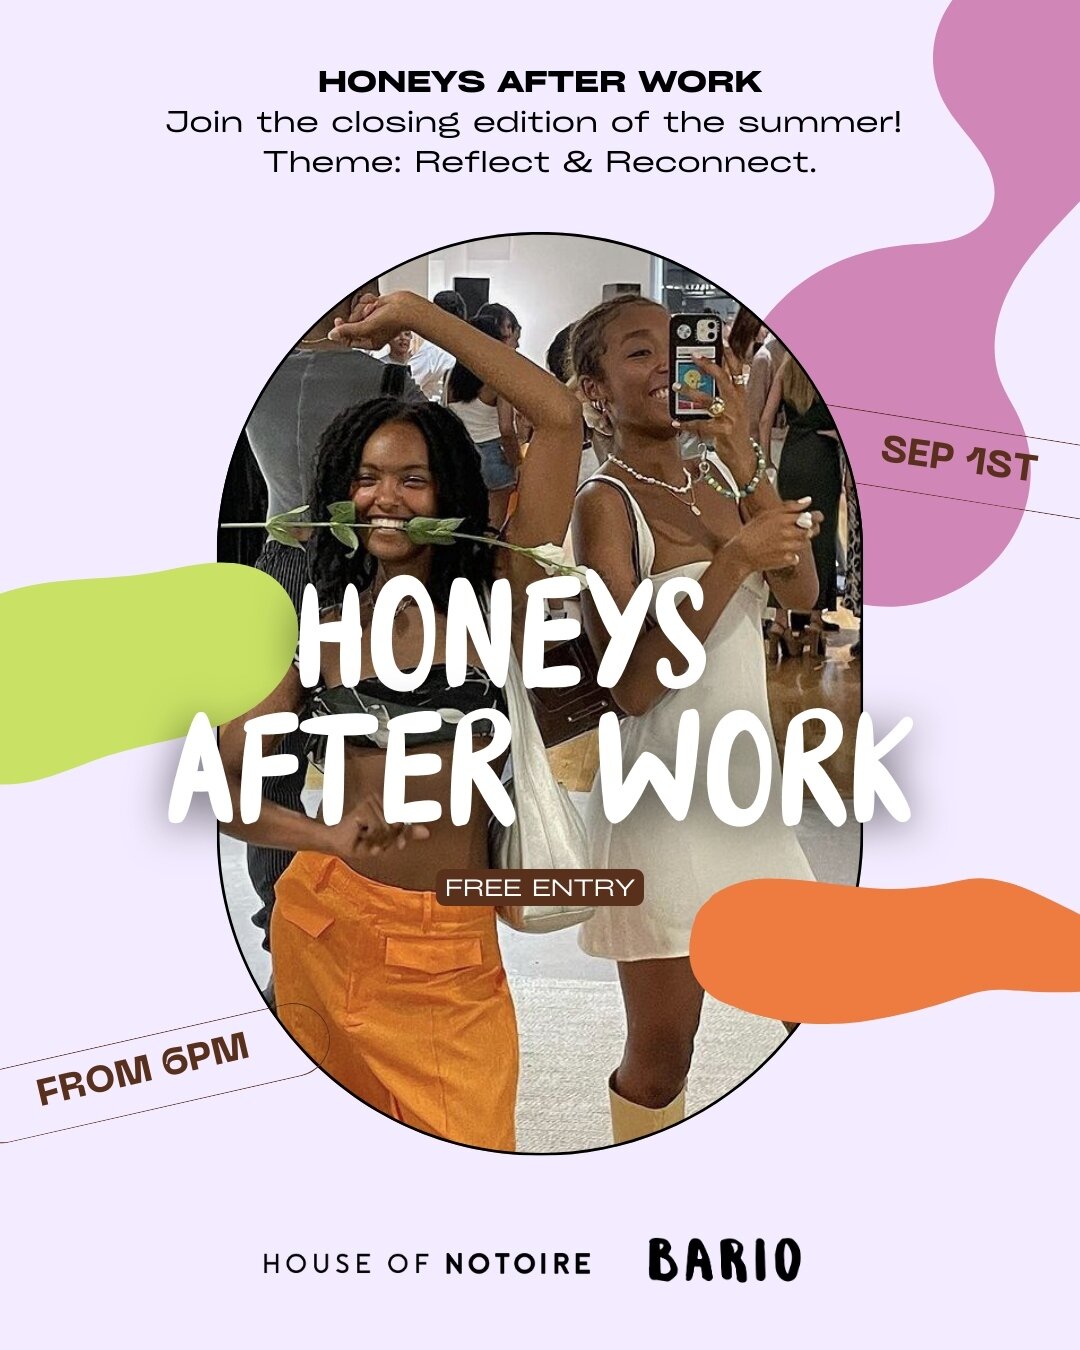 THE LAST HONEYS AFTER WORK!⁠
⁠
We had a great summer at @bar.bario, and now we're closing out the season with the last Honeys After Work. The theme of this edition is &quot;Reflect &amp; Reconnect&quot;. Bring a friend and make new ones, while we pla